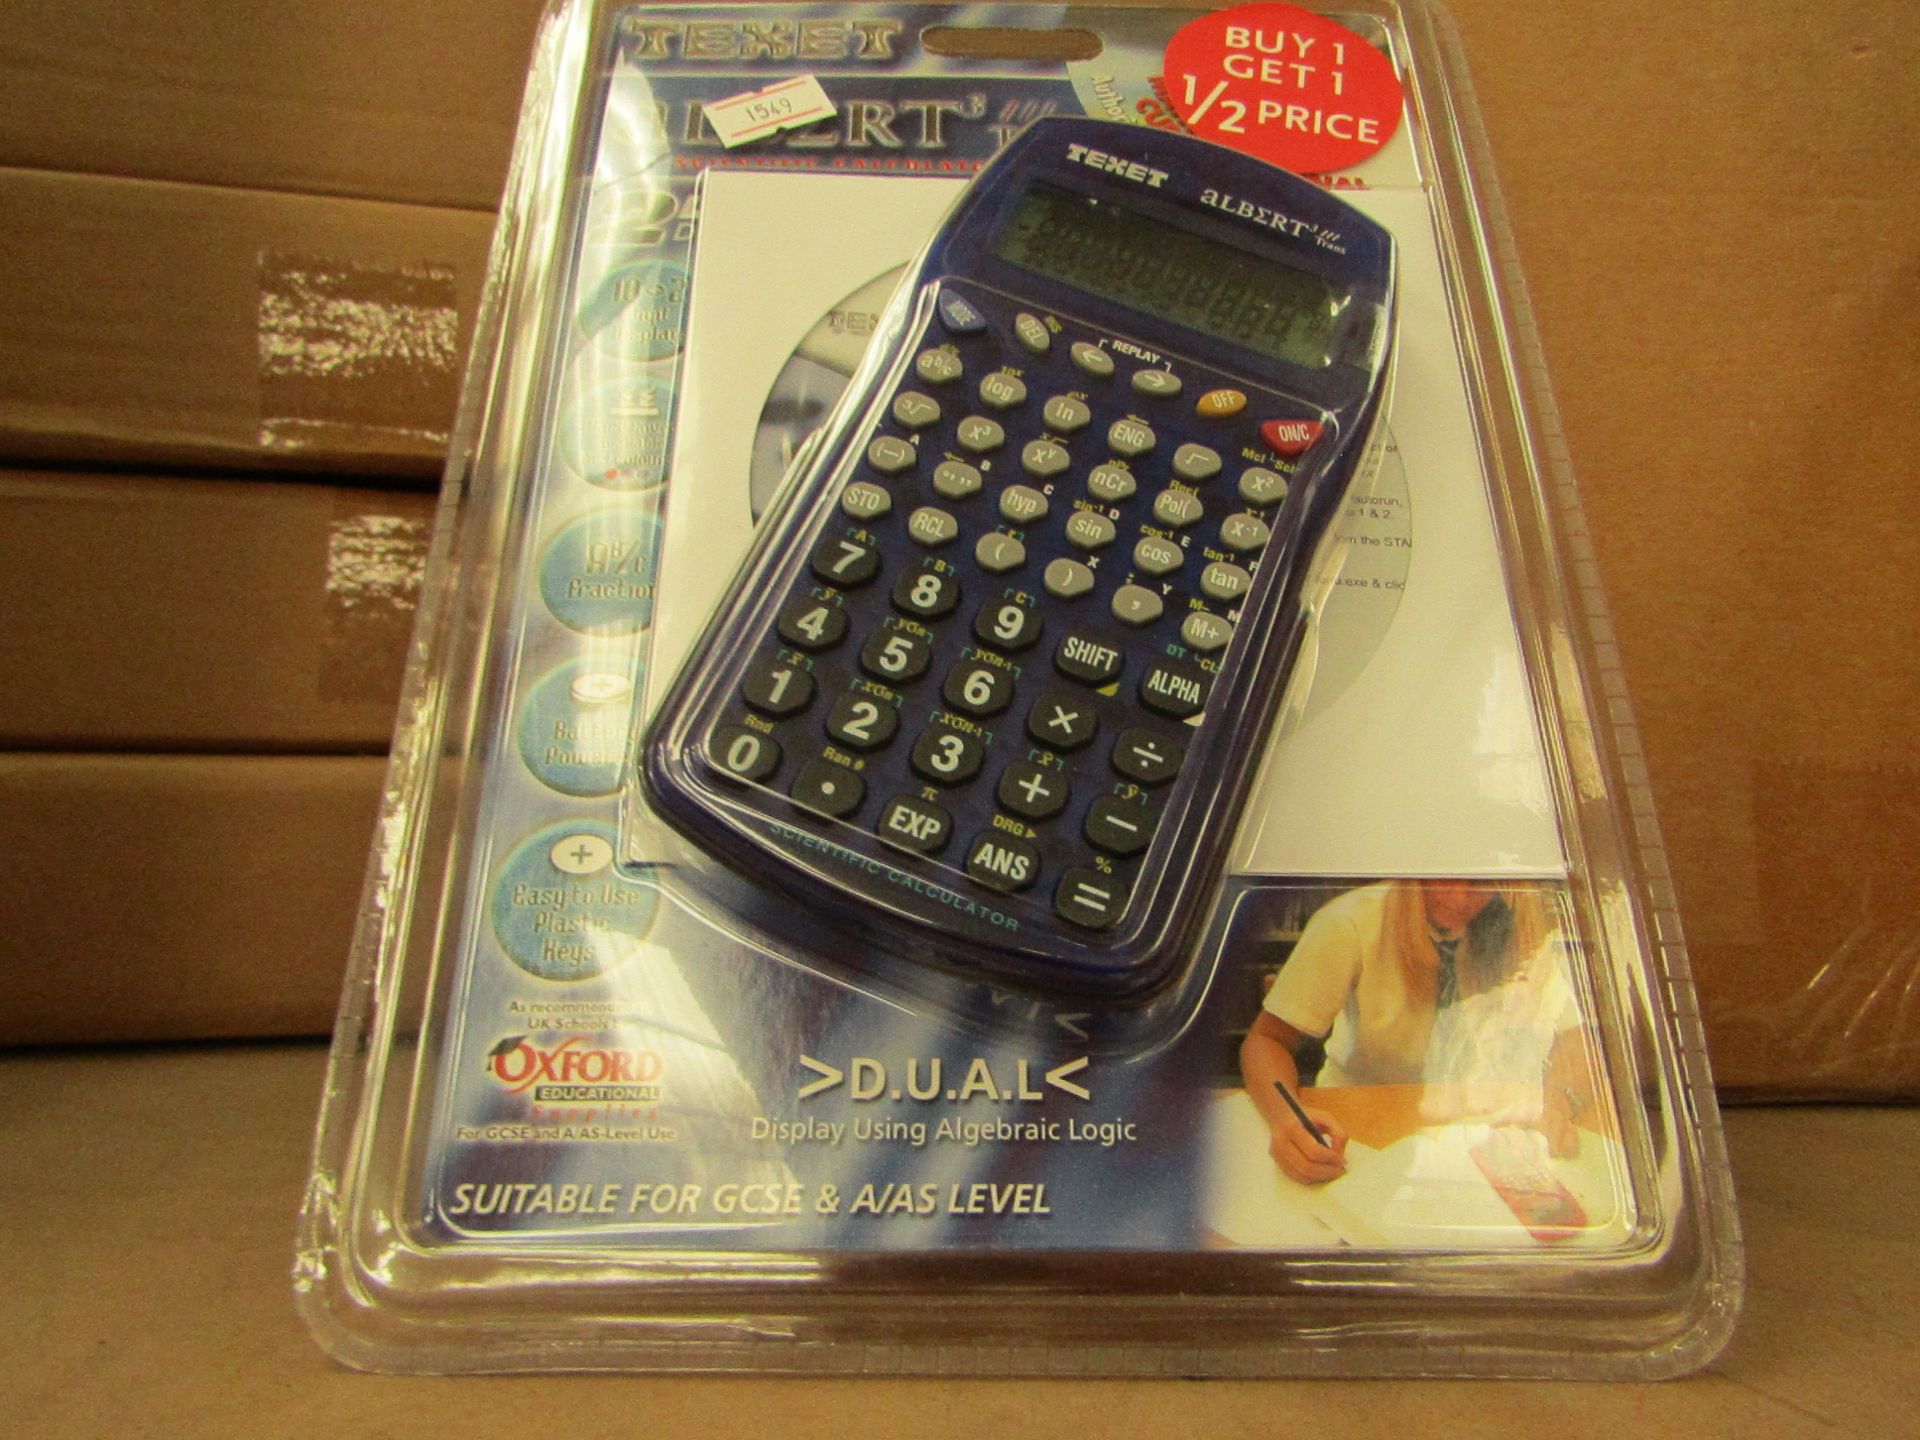 3x Texet fraction scientific calculator, New & Packaged